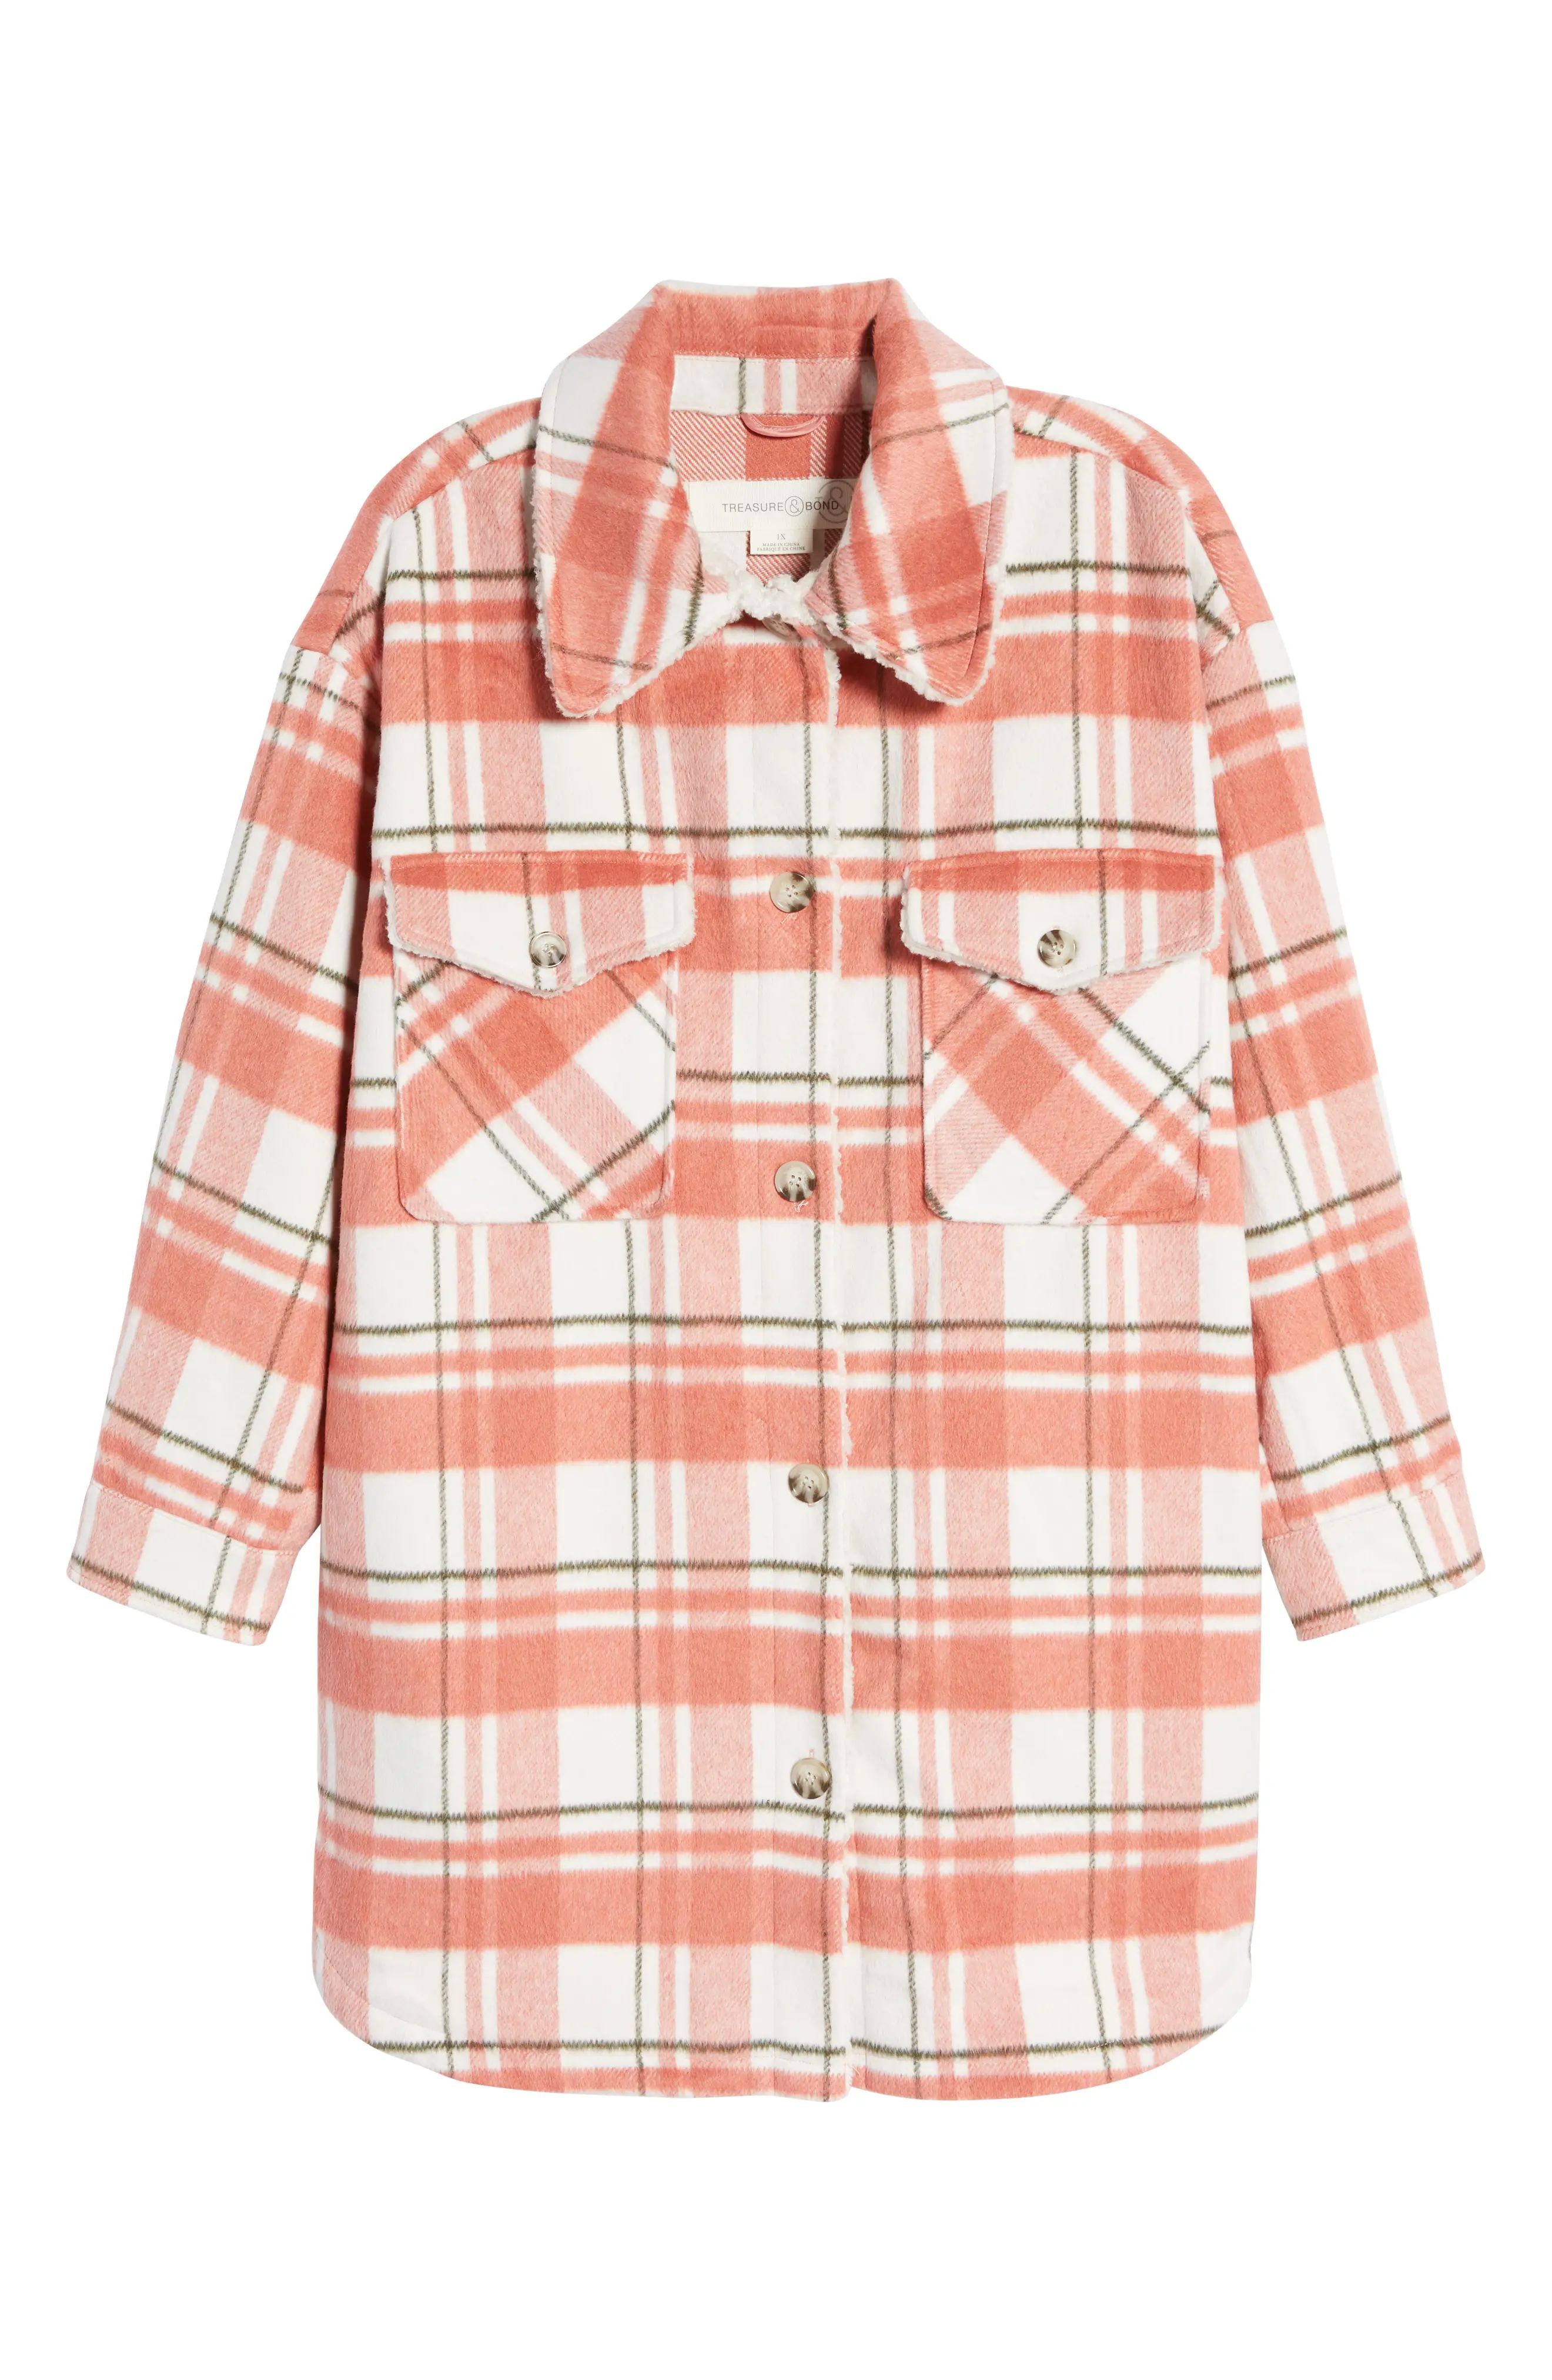 Treasure & Bond High Pile Fleece Lined Plaid Shacket, Size 2X in Pink Mixed Plaid at Nordstrom | Nordstrom